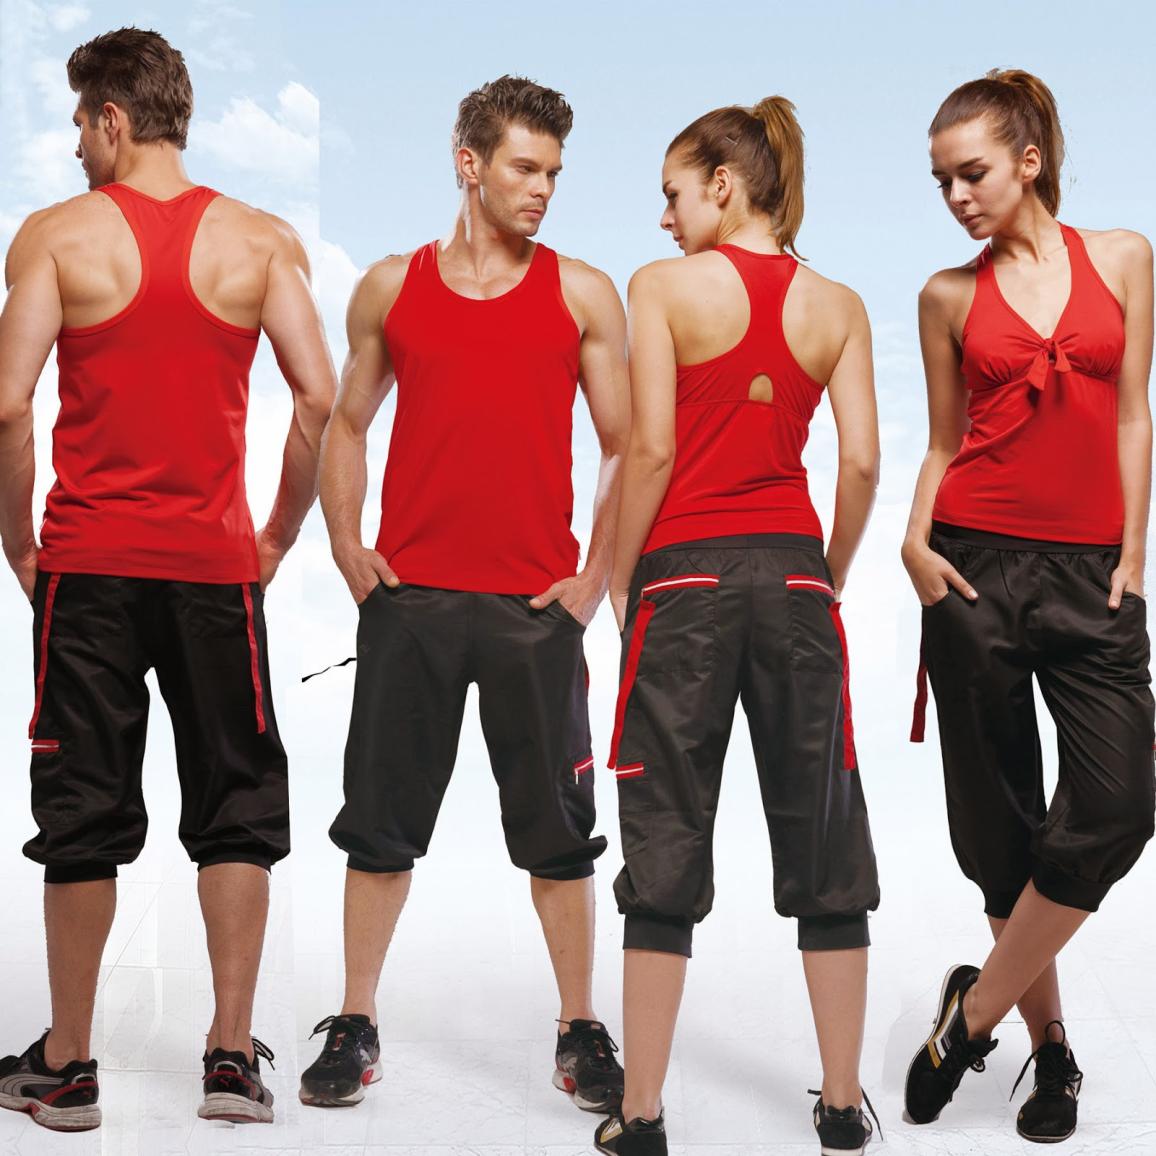 How Can Activewear Be Used To Enhance Athletic Performance?